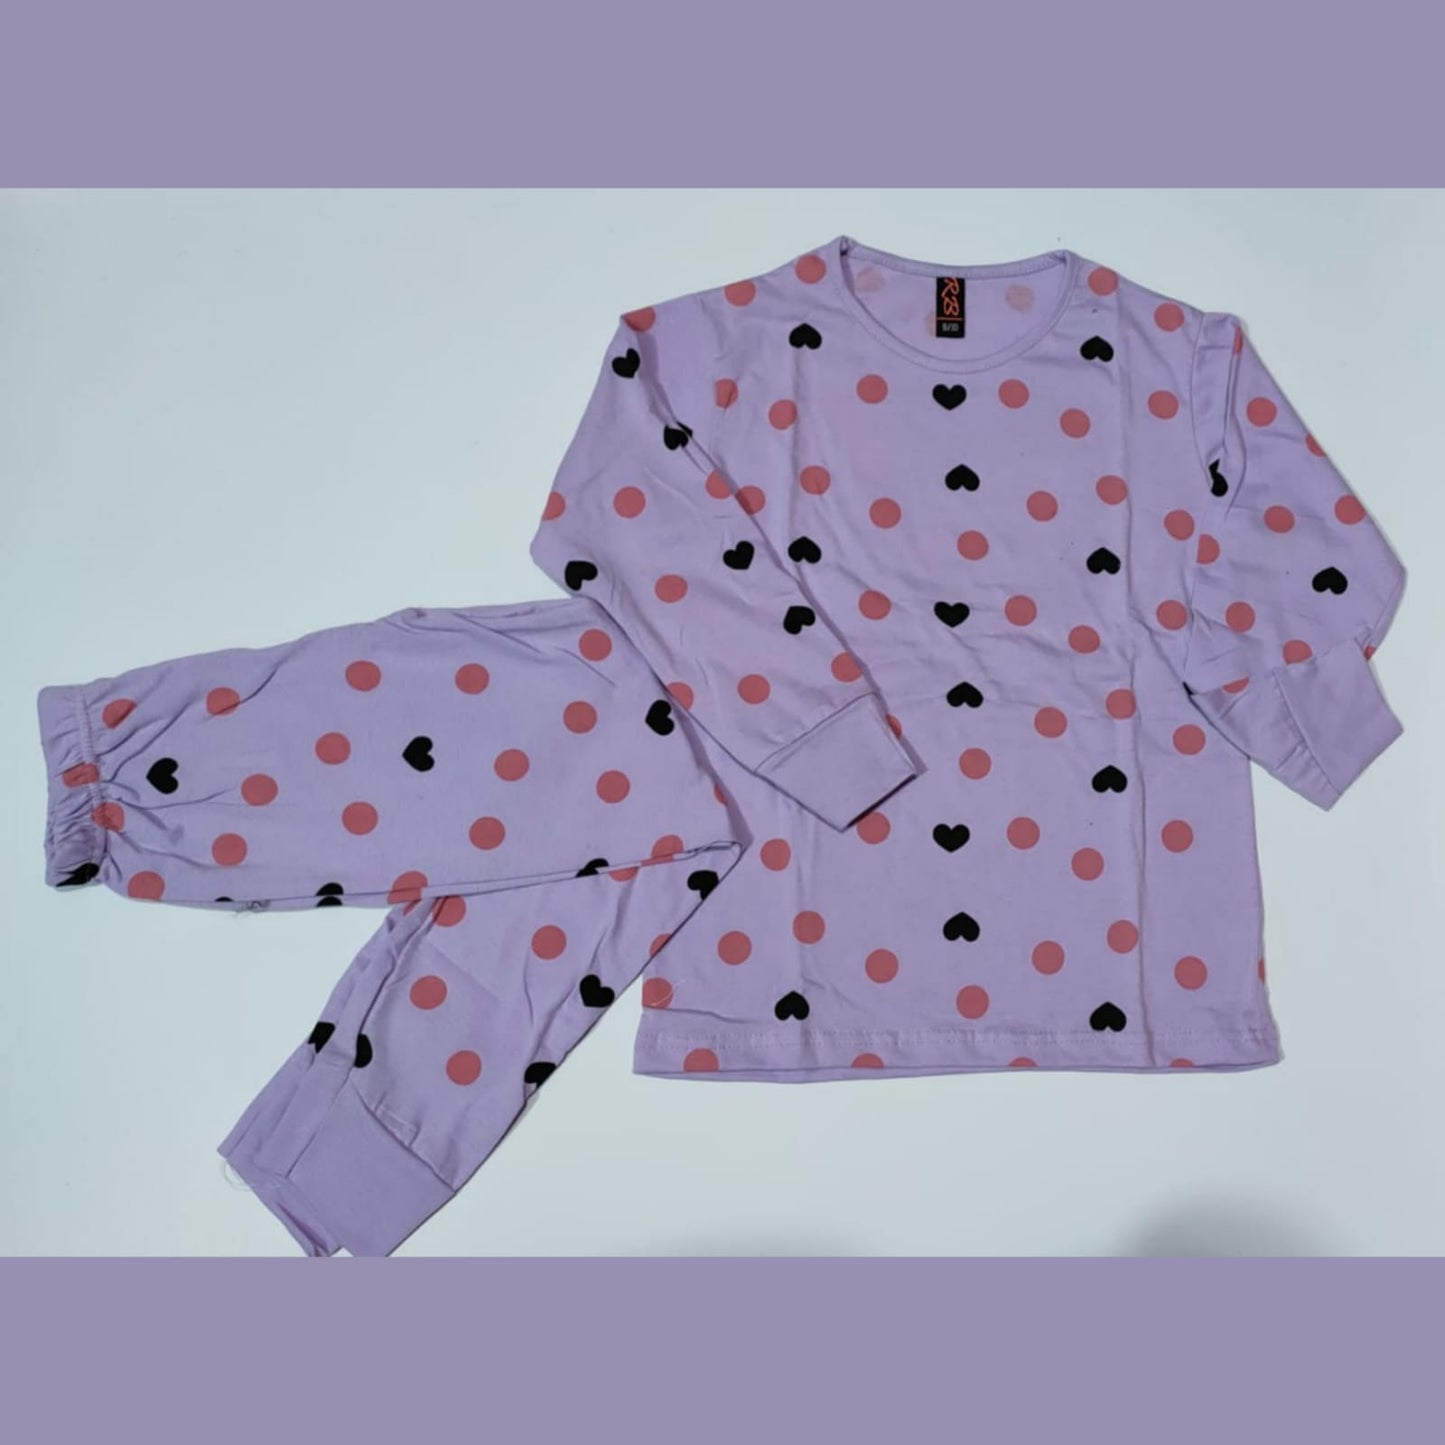 Baby or Baba Purple Hearts Print Full Sleeves Night Suit for Kids (1 Pcs) (RX-124)